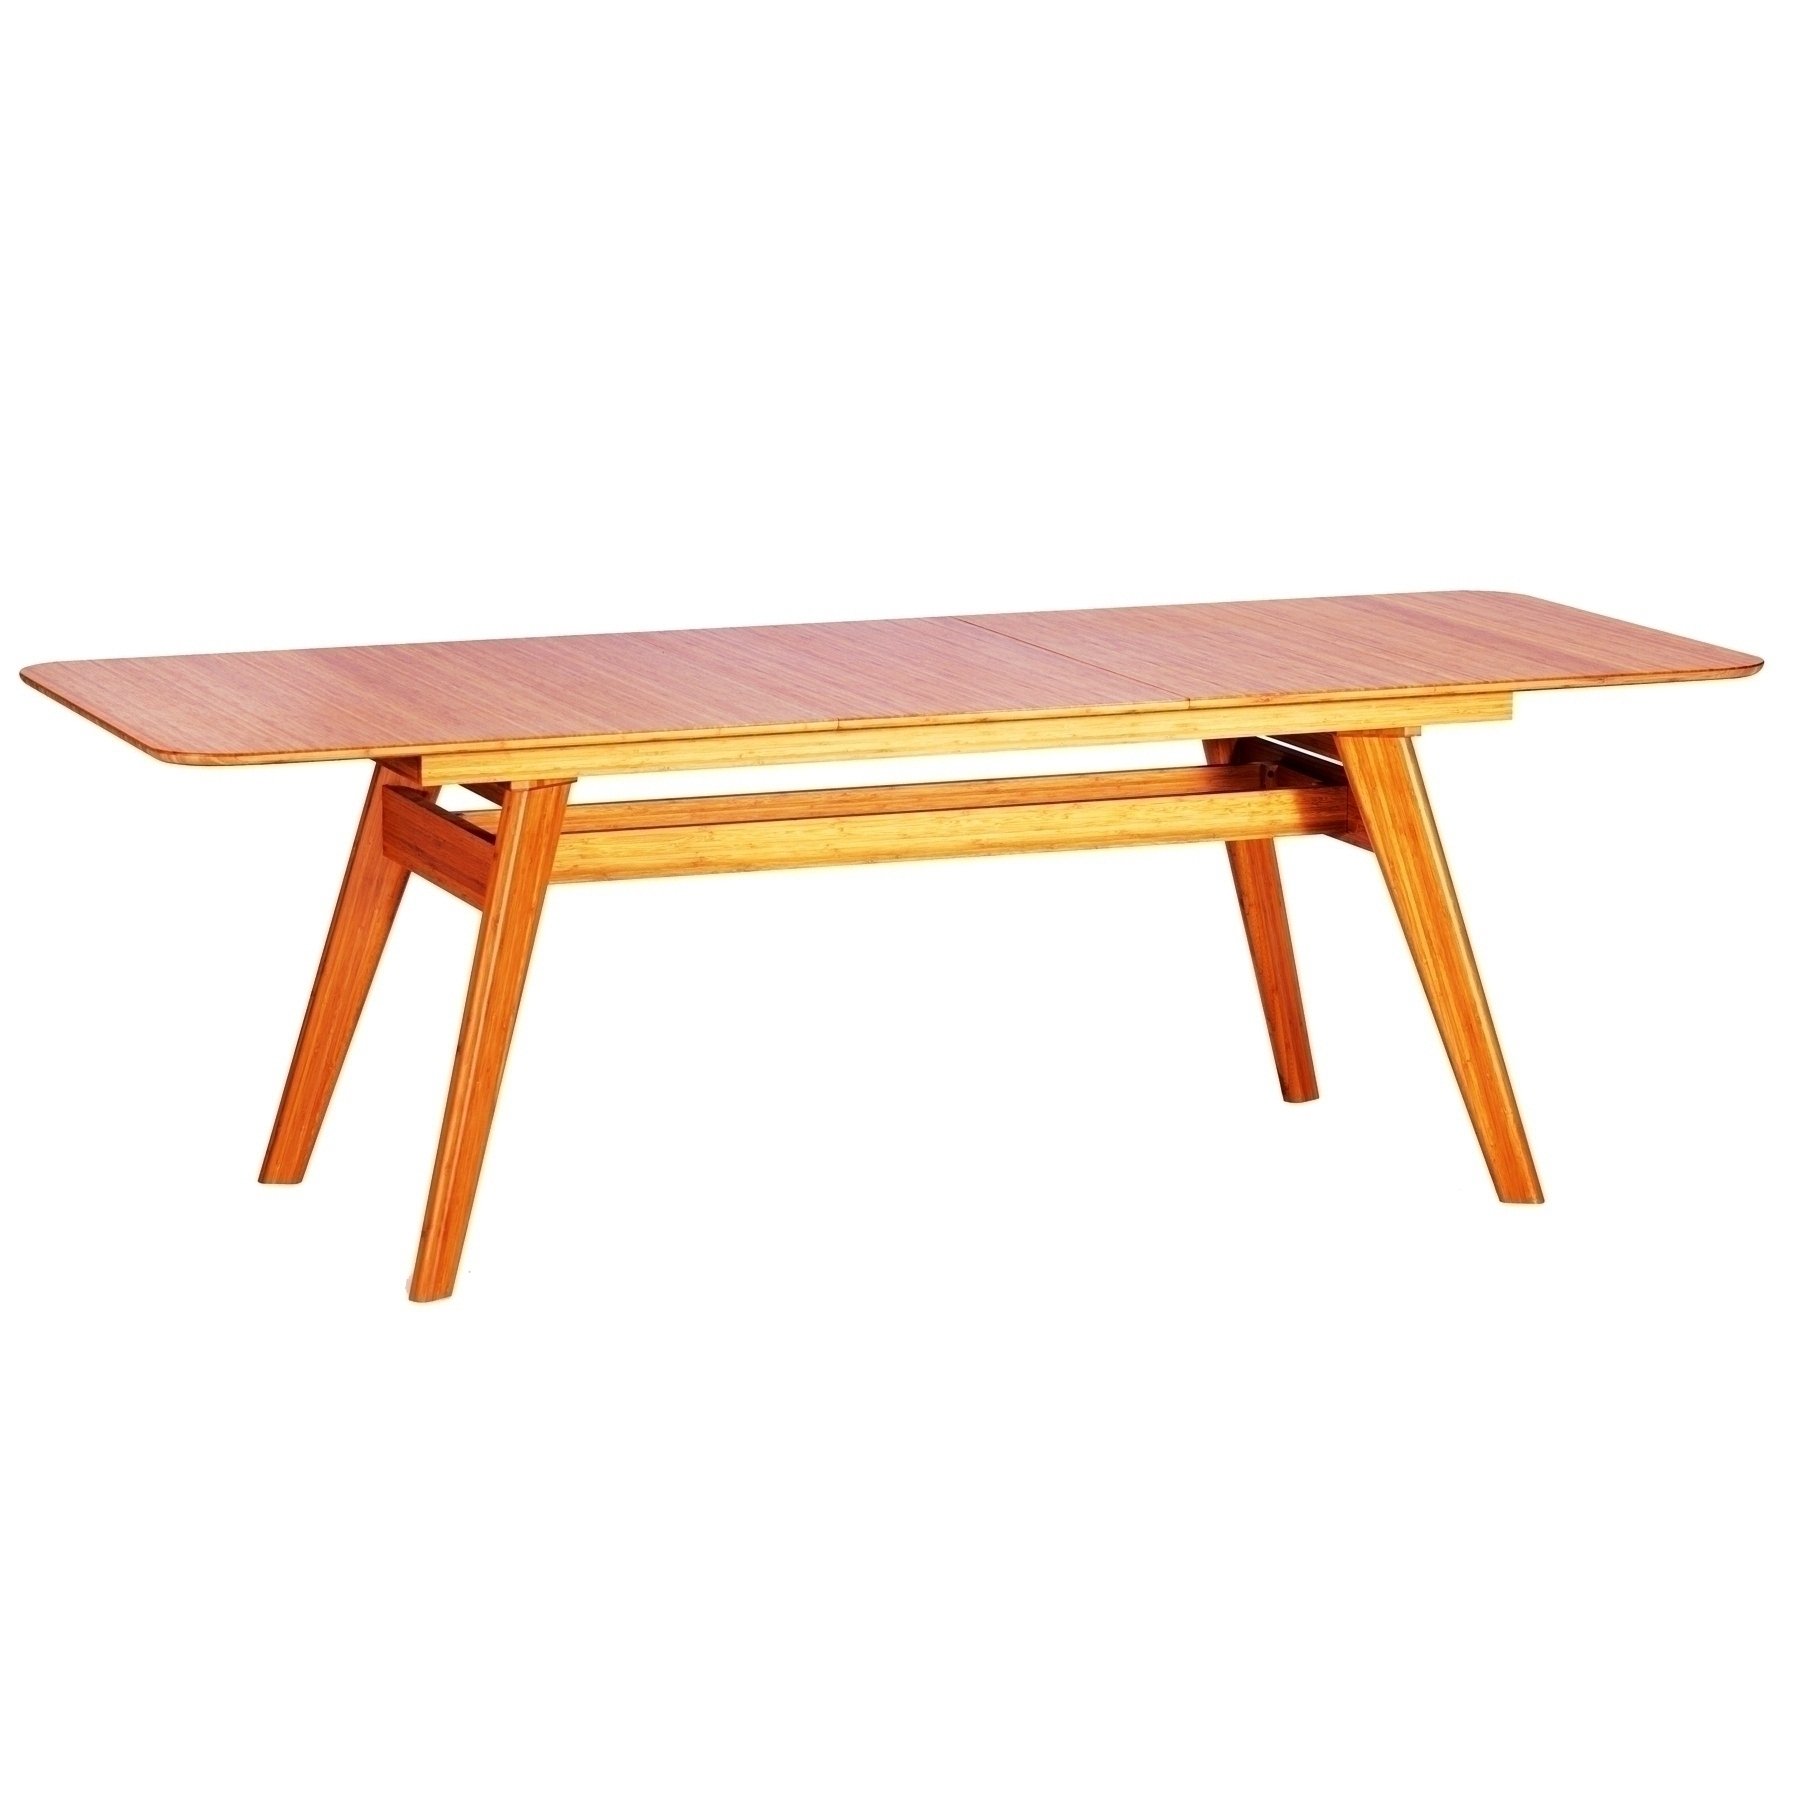 currant dining table - caramelized